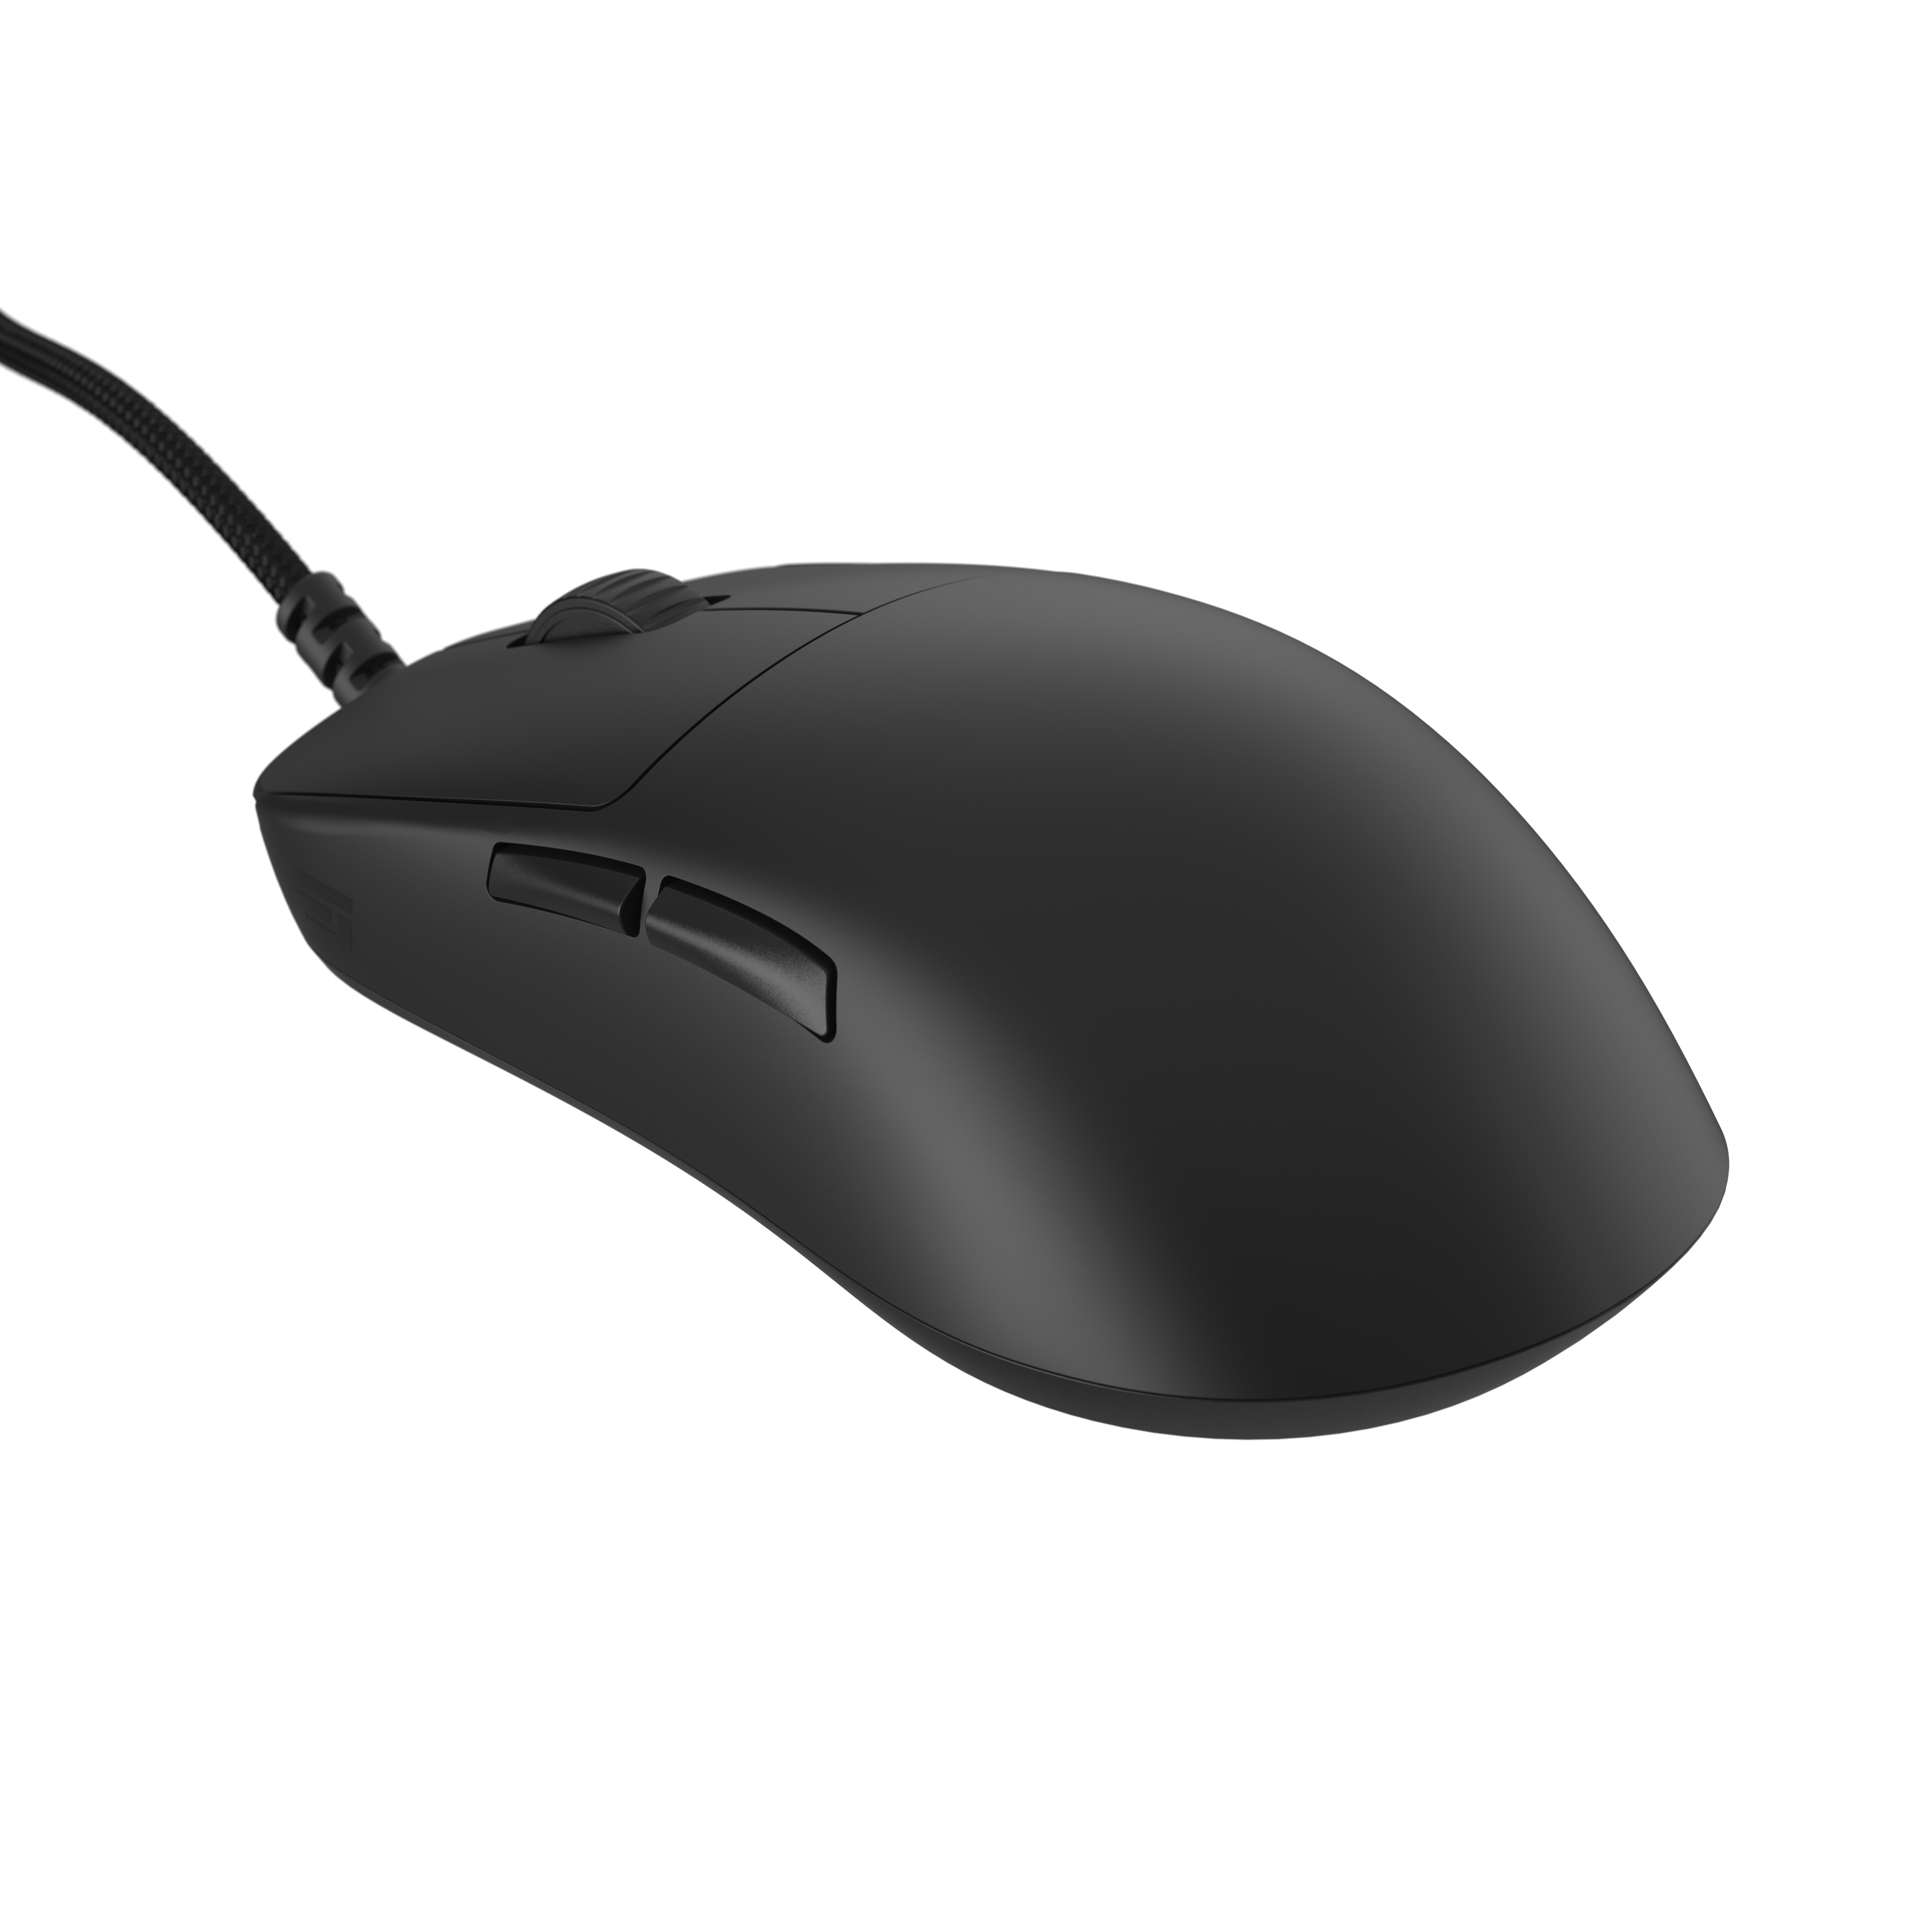 OP1 Gaming Mouse - Black